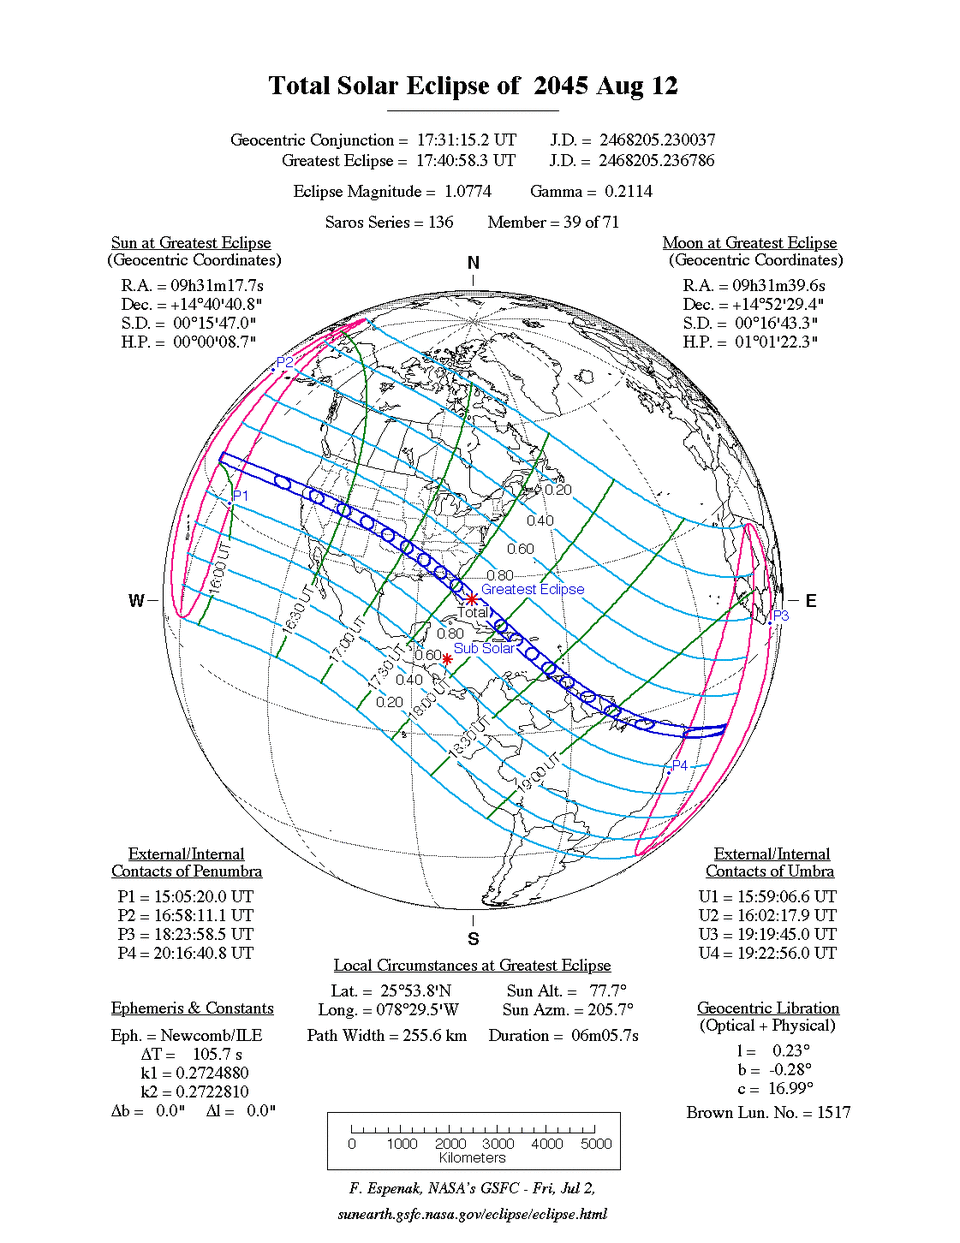 Solar eclipse coming to North America in August 2045.